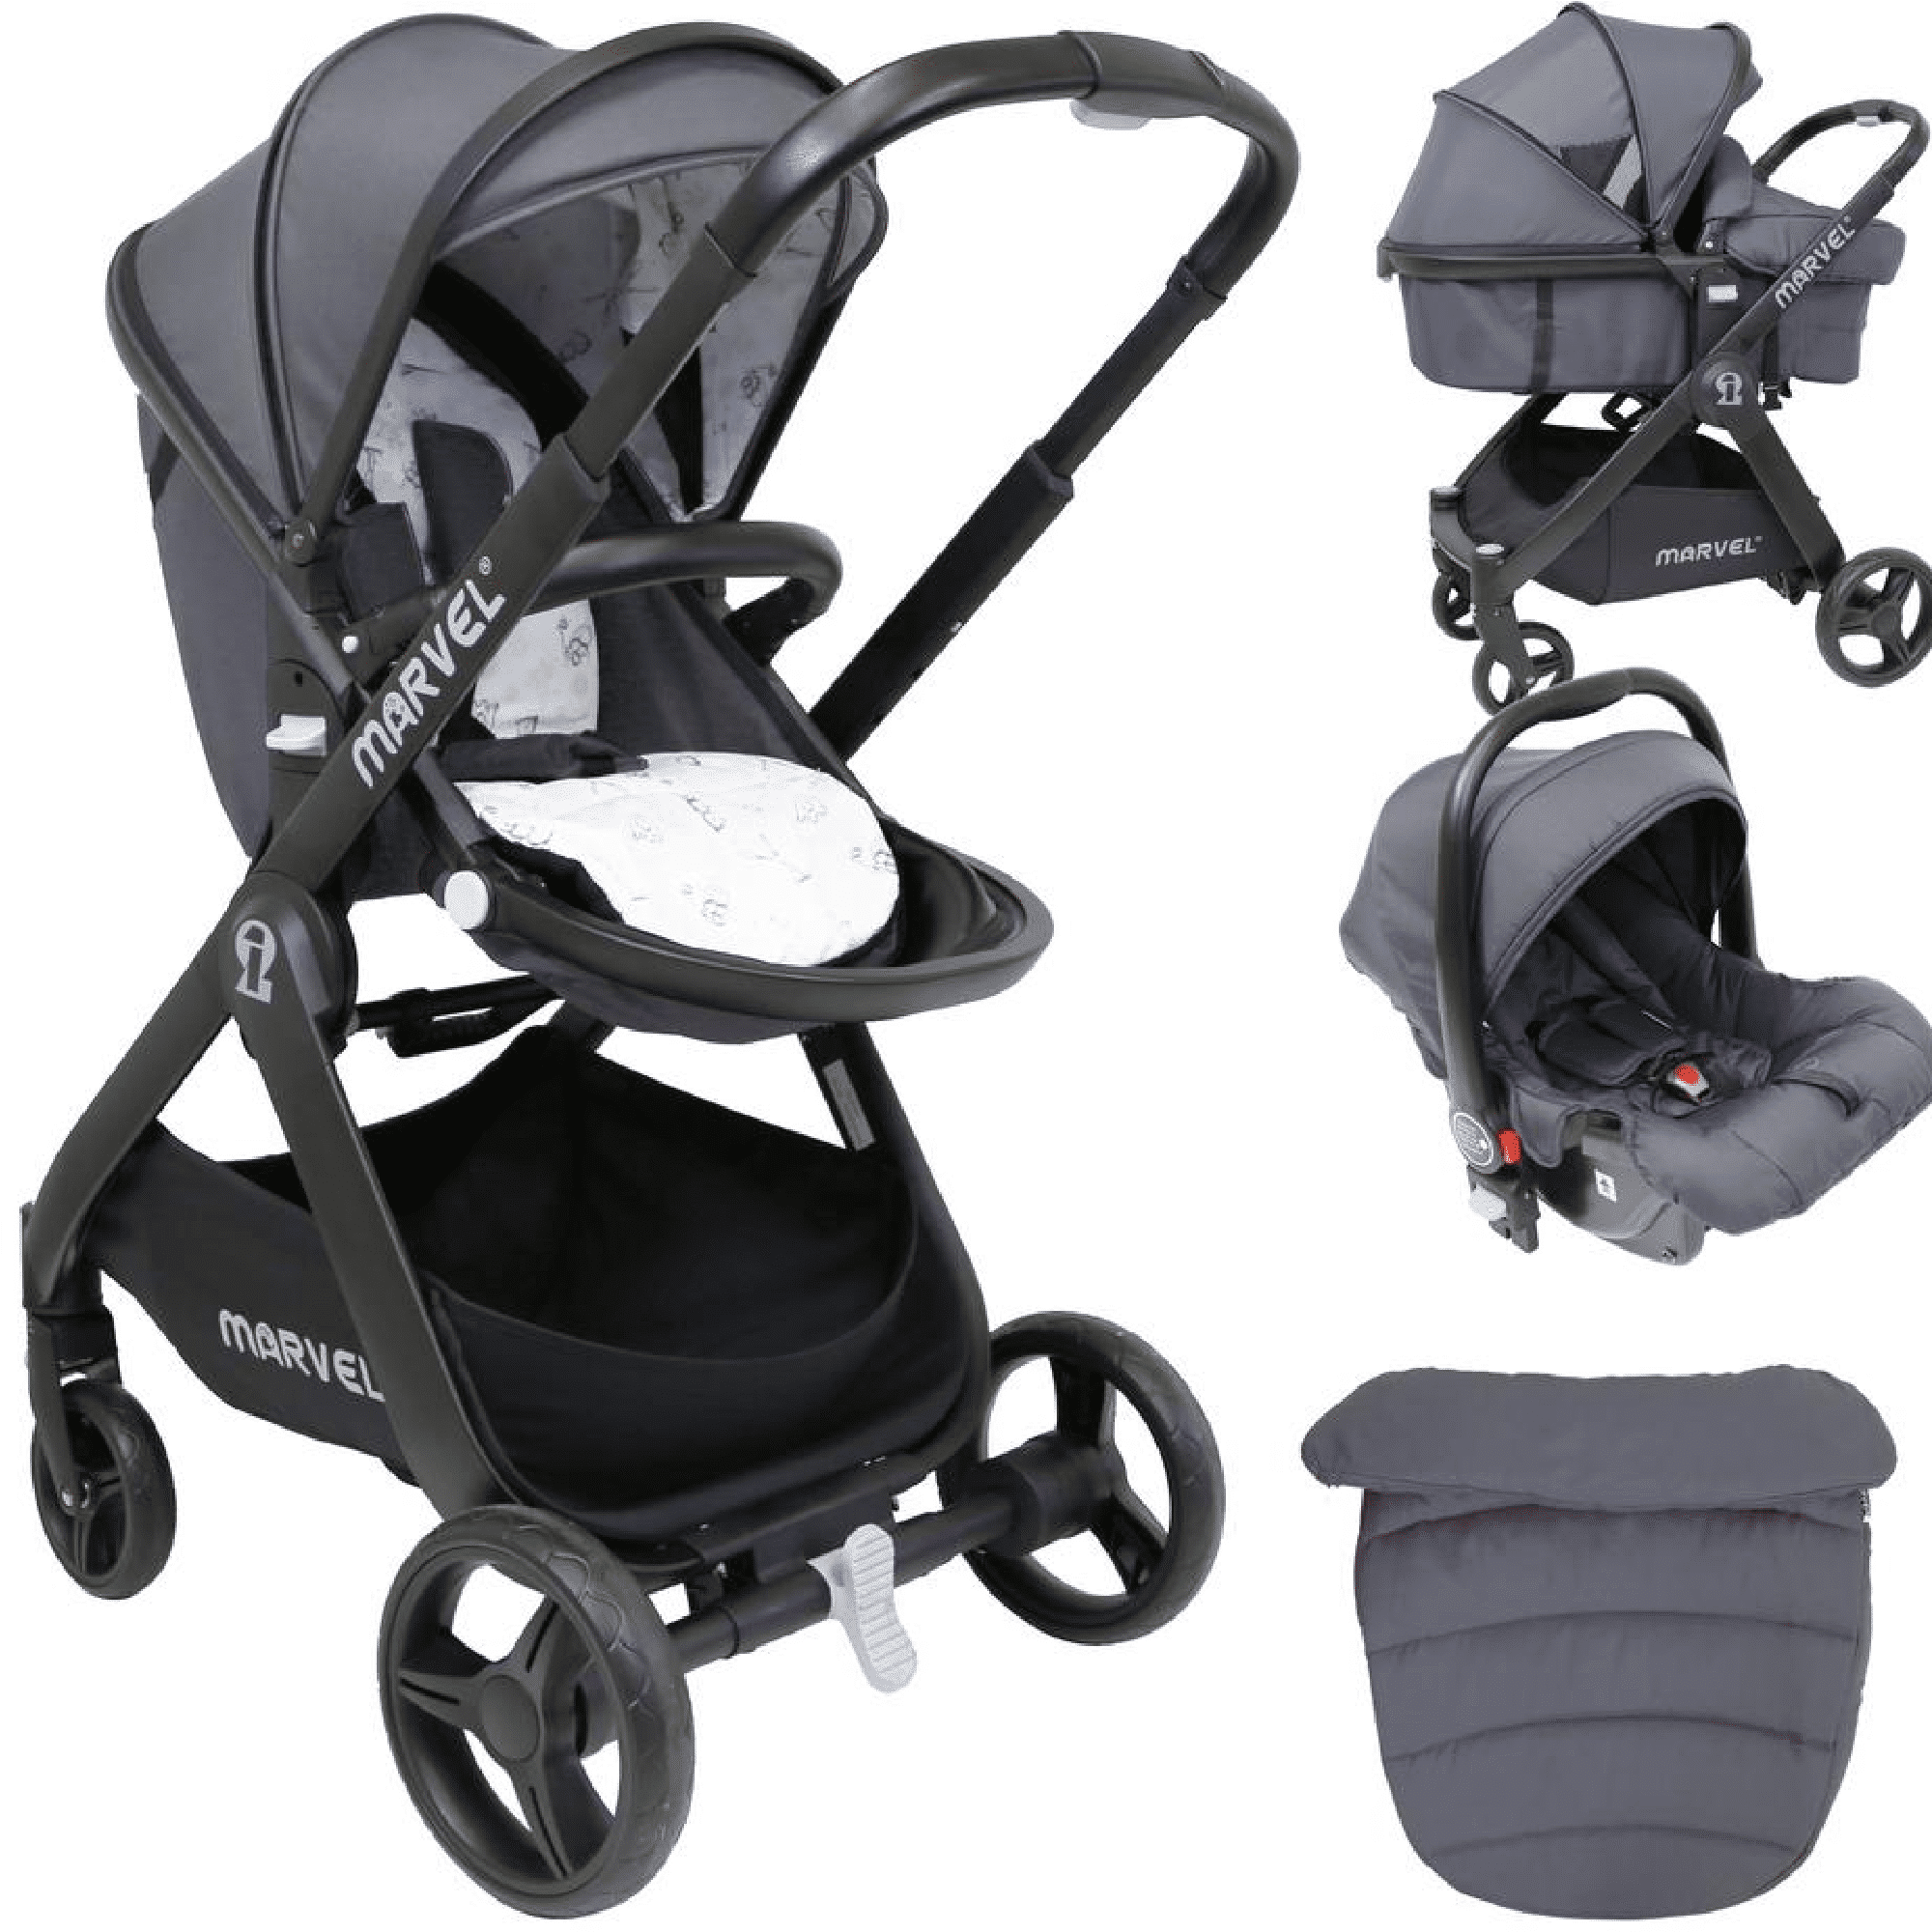 isafe pushchair